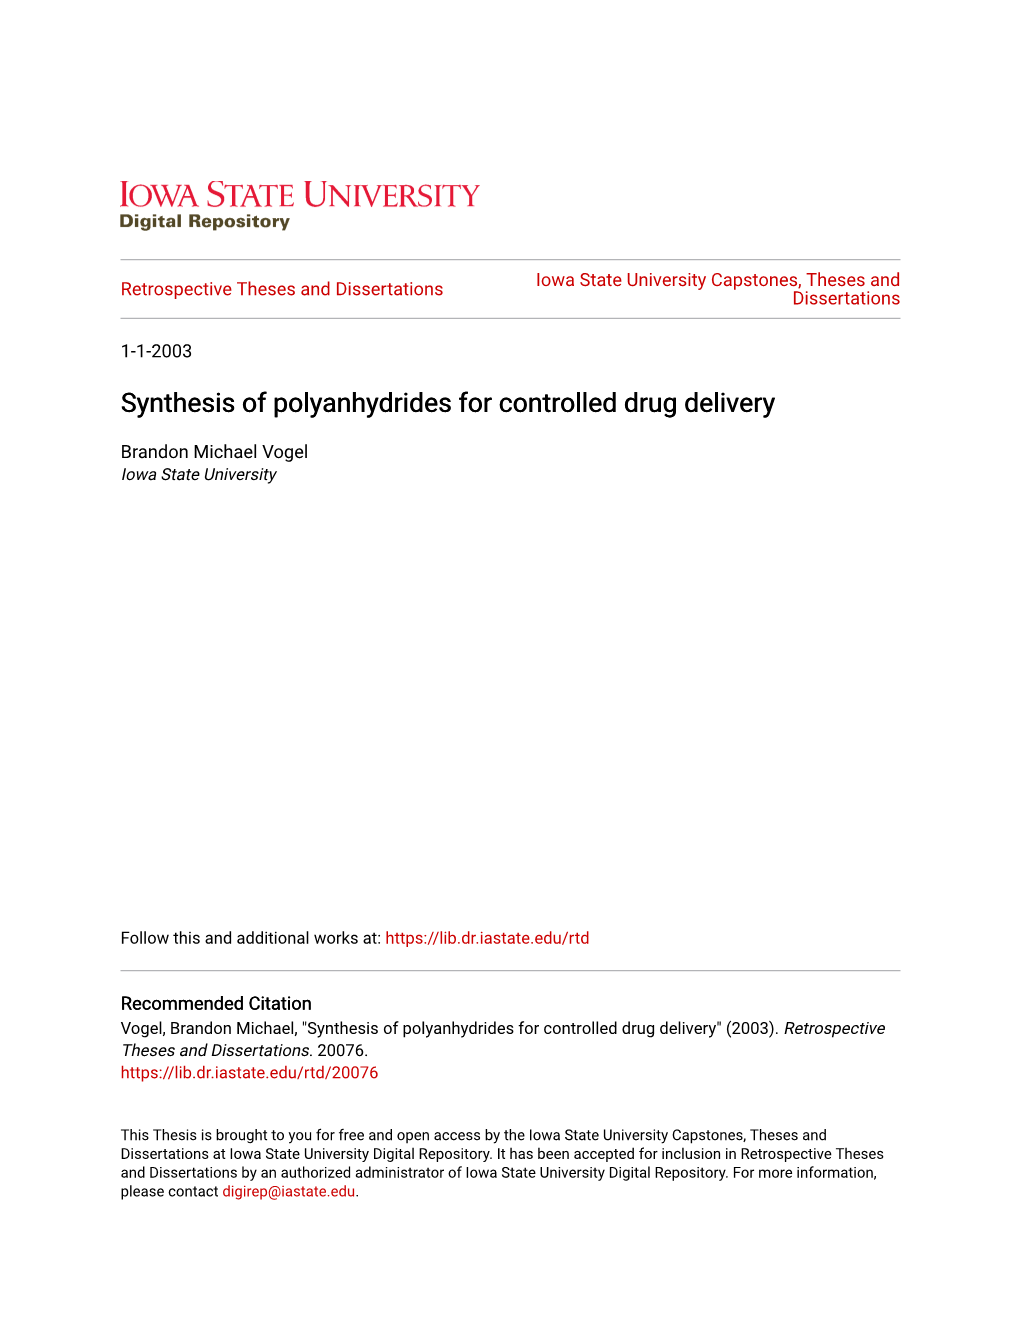 Synthesis of Polyanhydrides for Controlled Drug Delivery